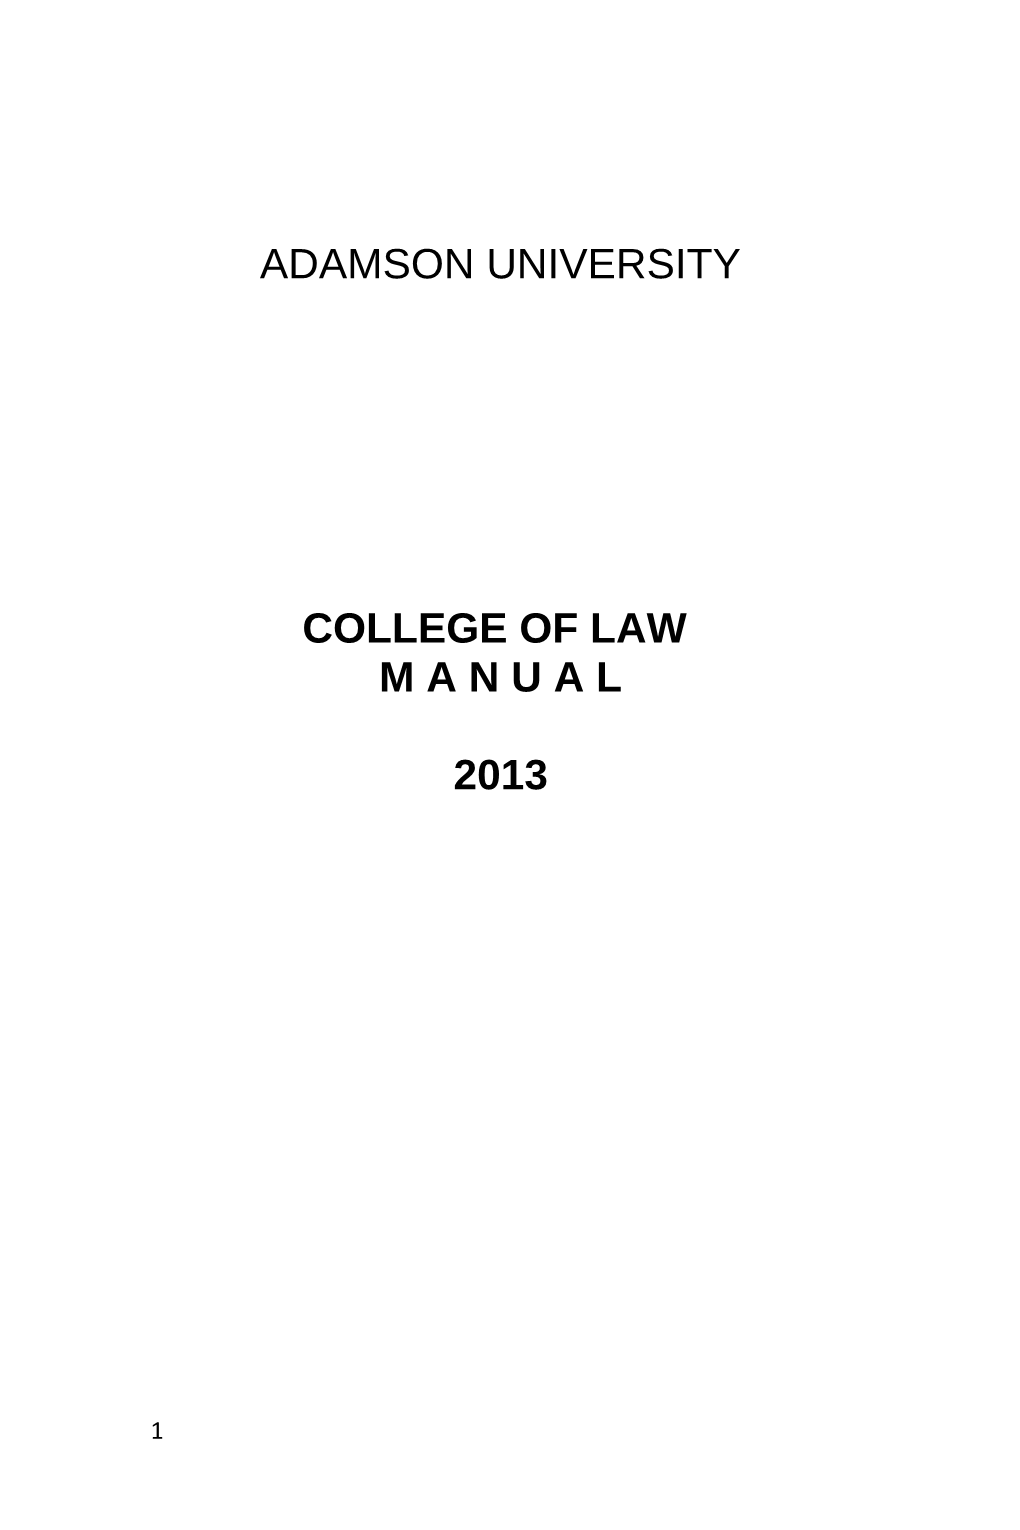 Part One - the COLLEGE of LAW